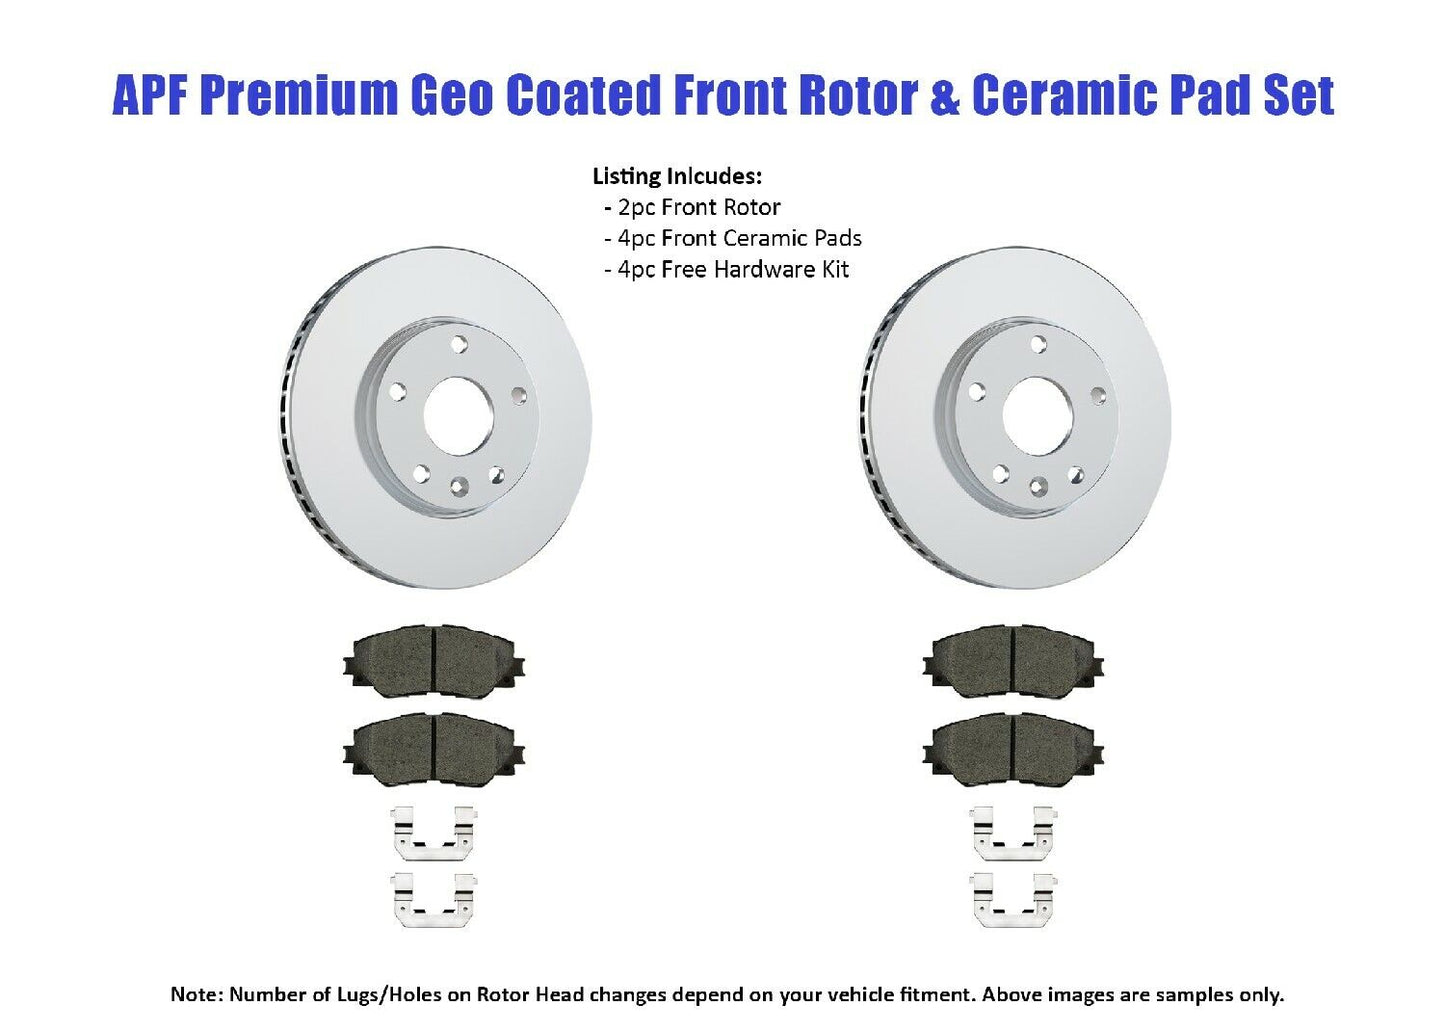 Front Premium Geo Coated Brake Rotor & Pad compatible with Ford Special Service Police Sedan | $185.51